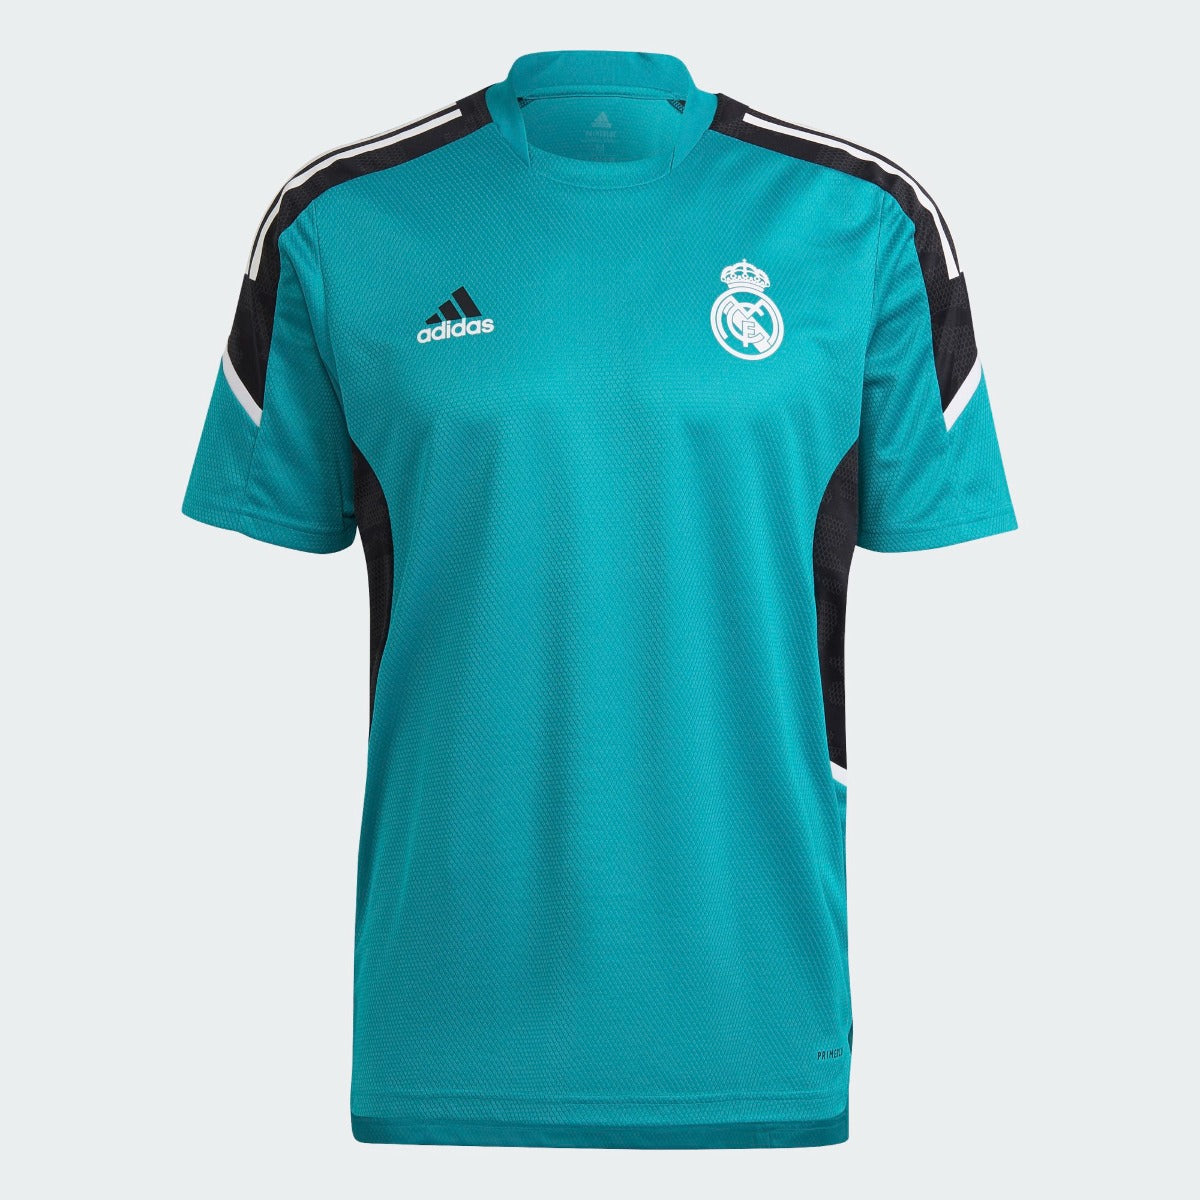 Adidas 2021-22 Real Madrid Euro Training Jersey - Teal (Front)